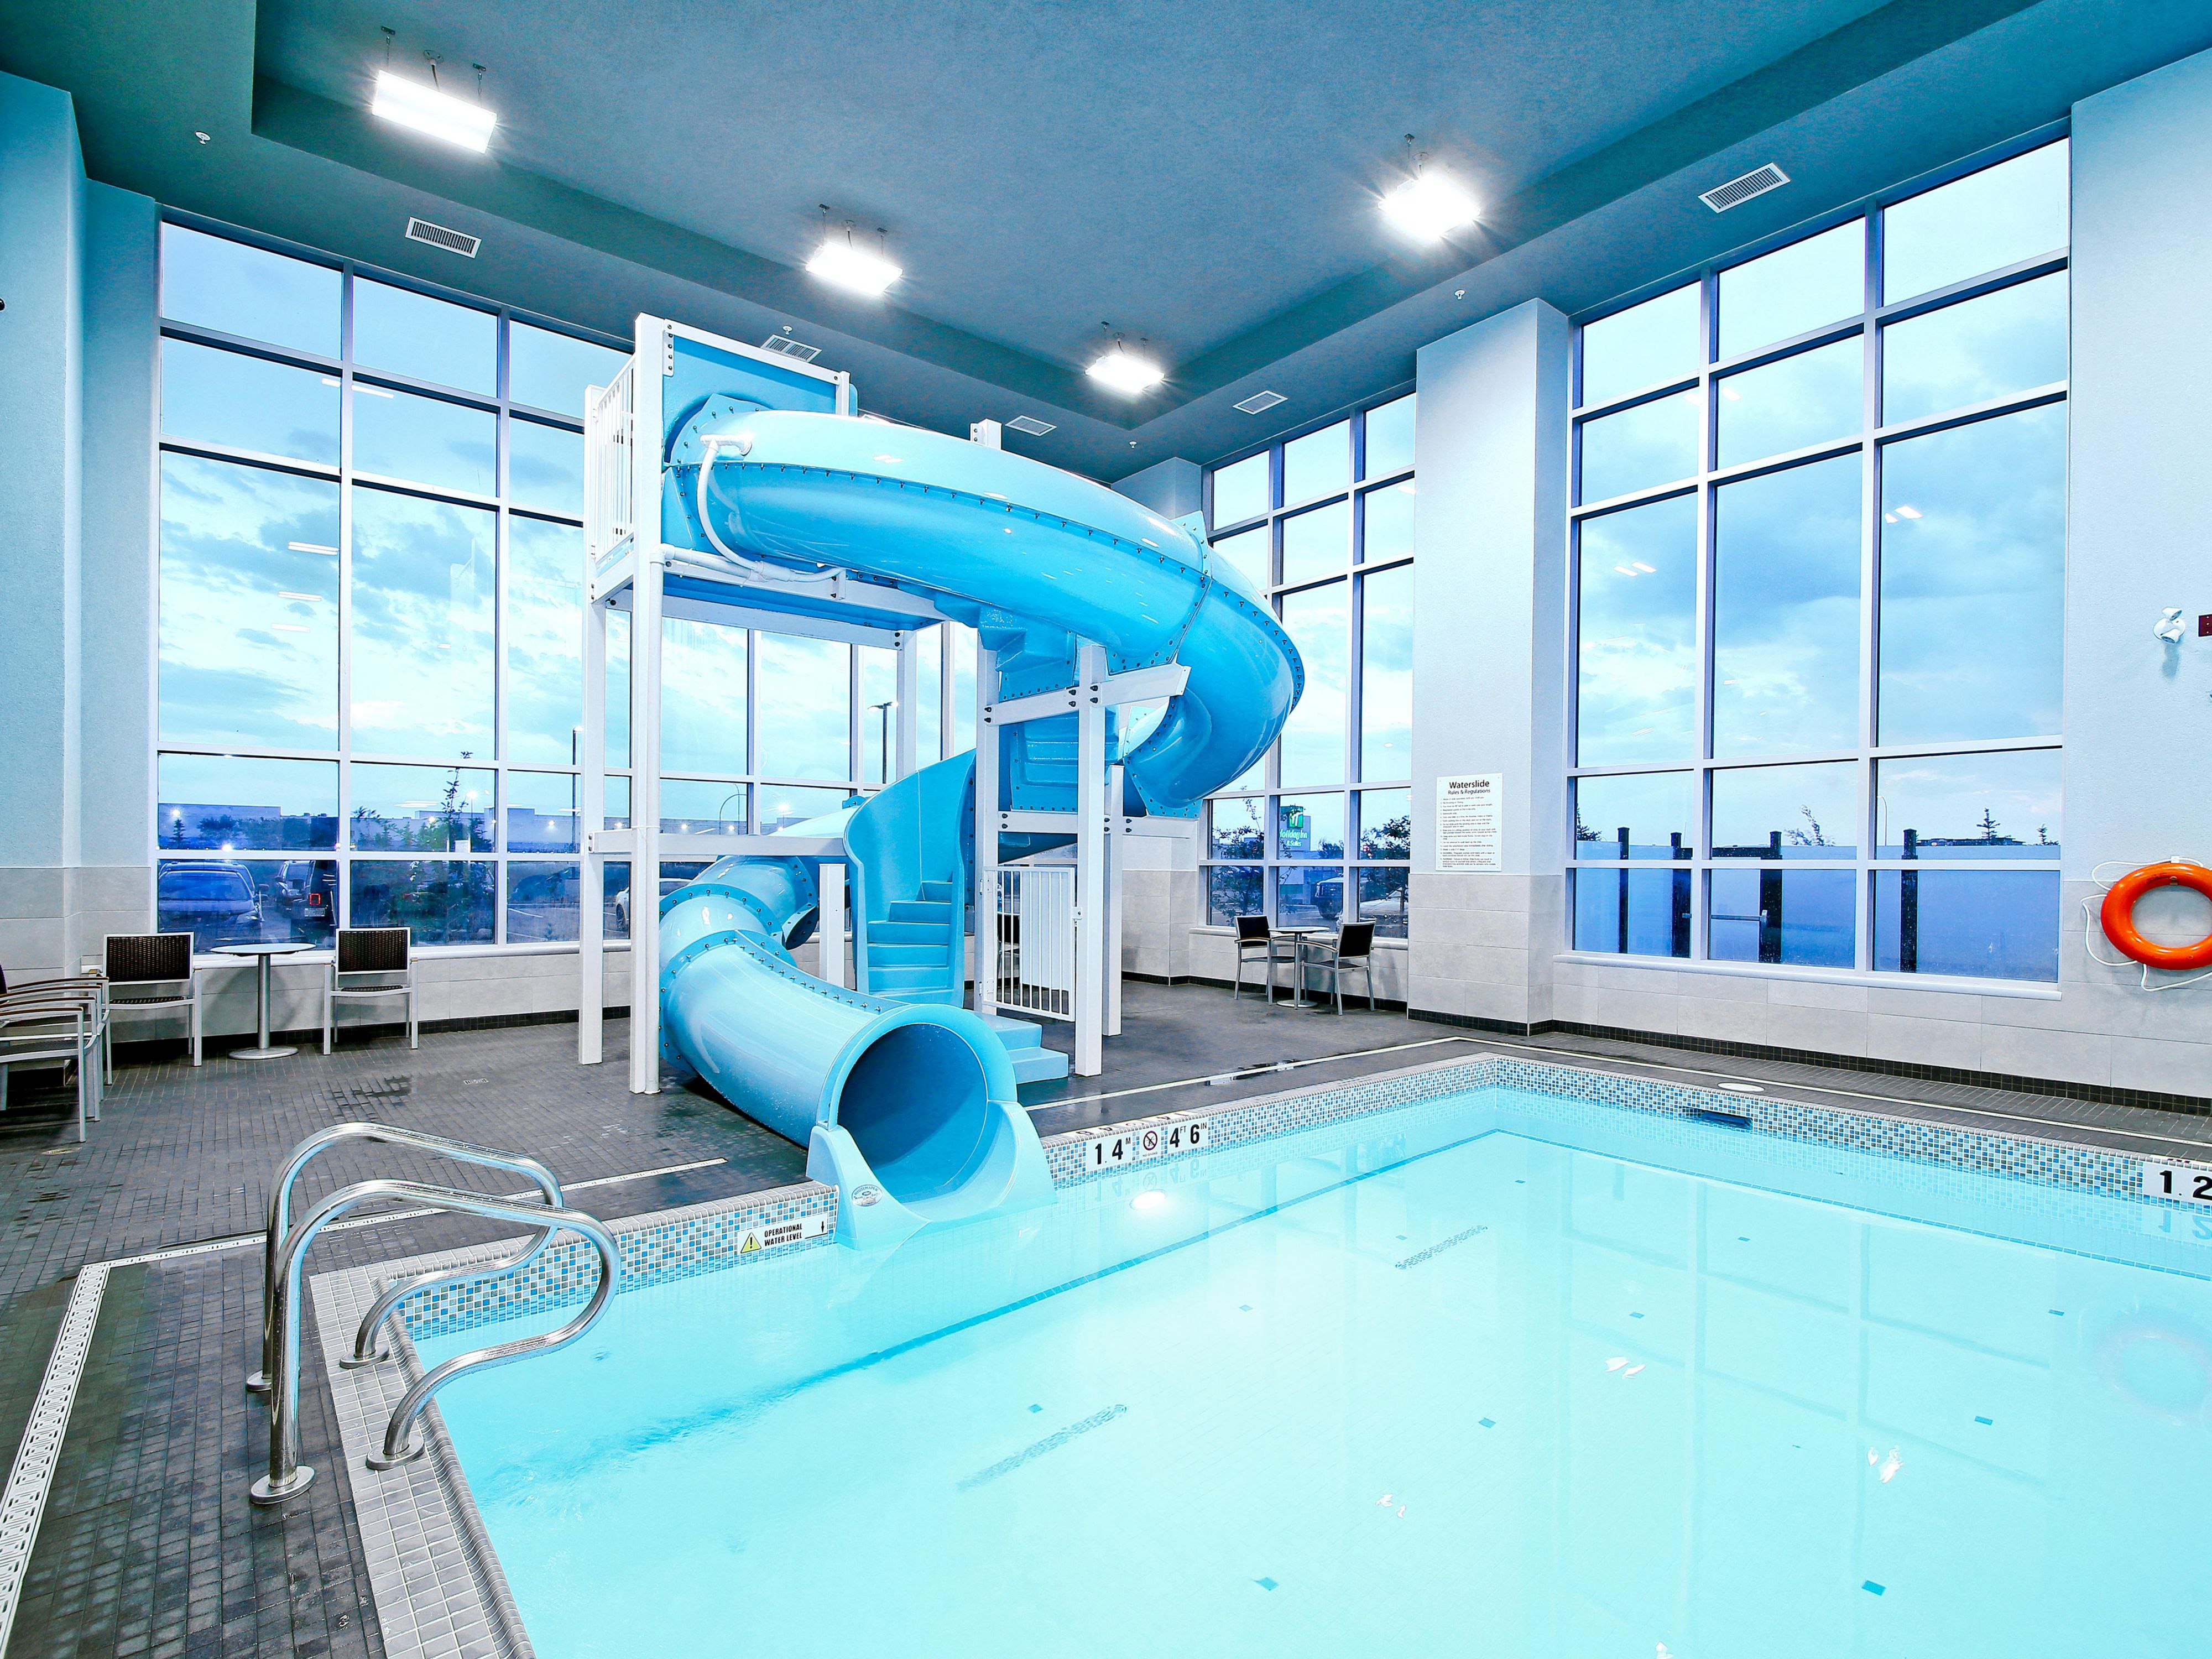 For the young and young at heart! Enjoy a leisurely swim in our heated pool or fun trip down the slide!
